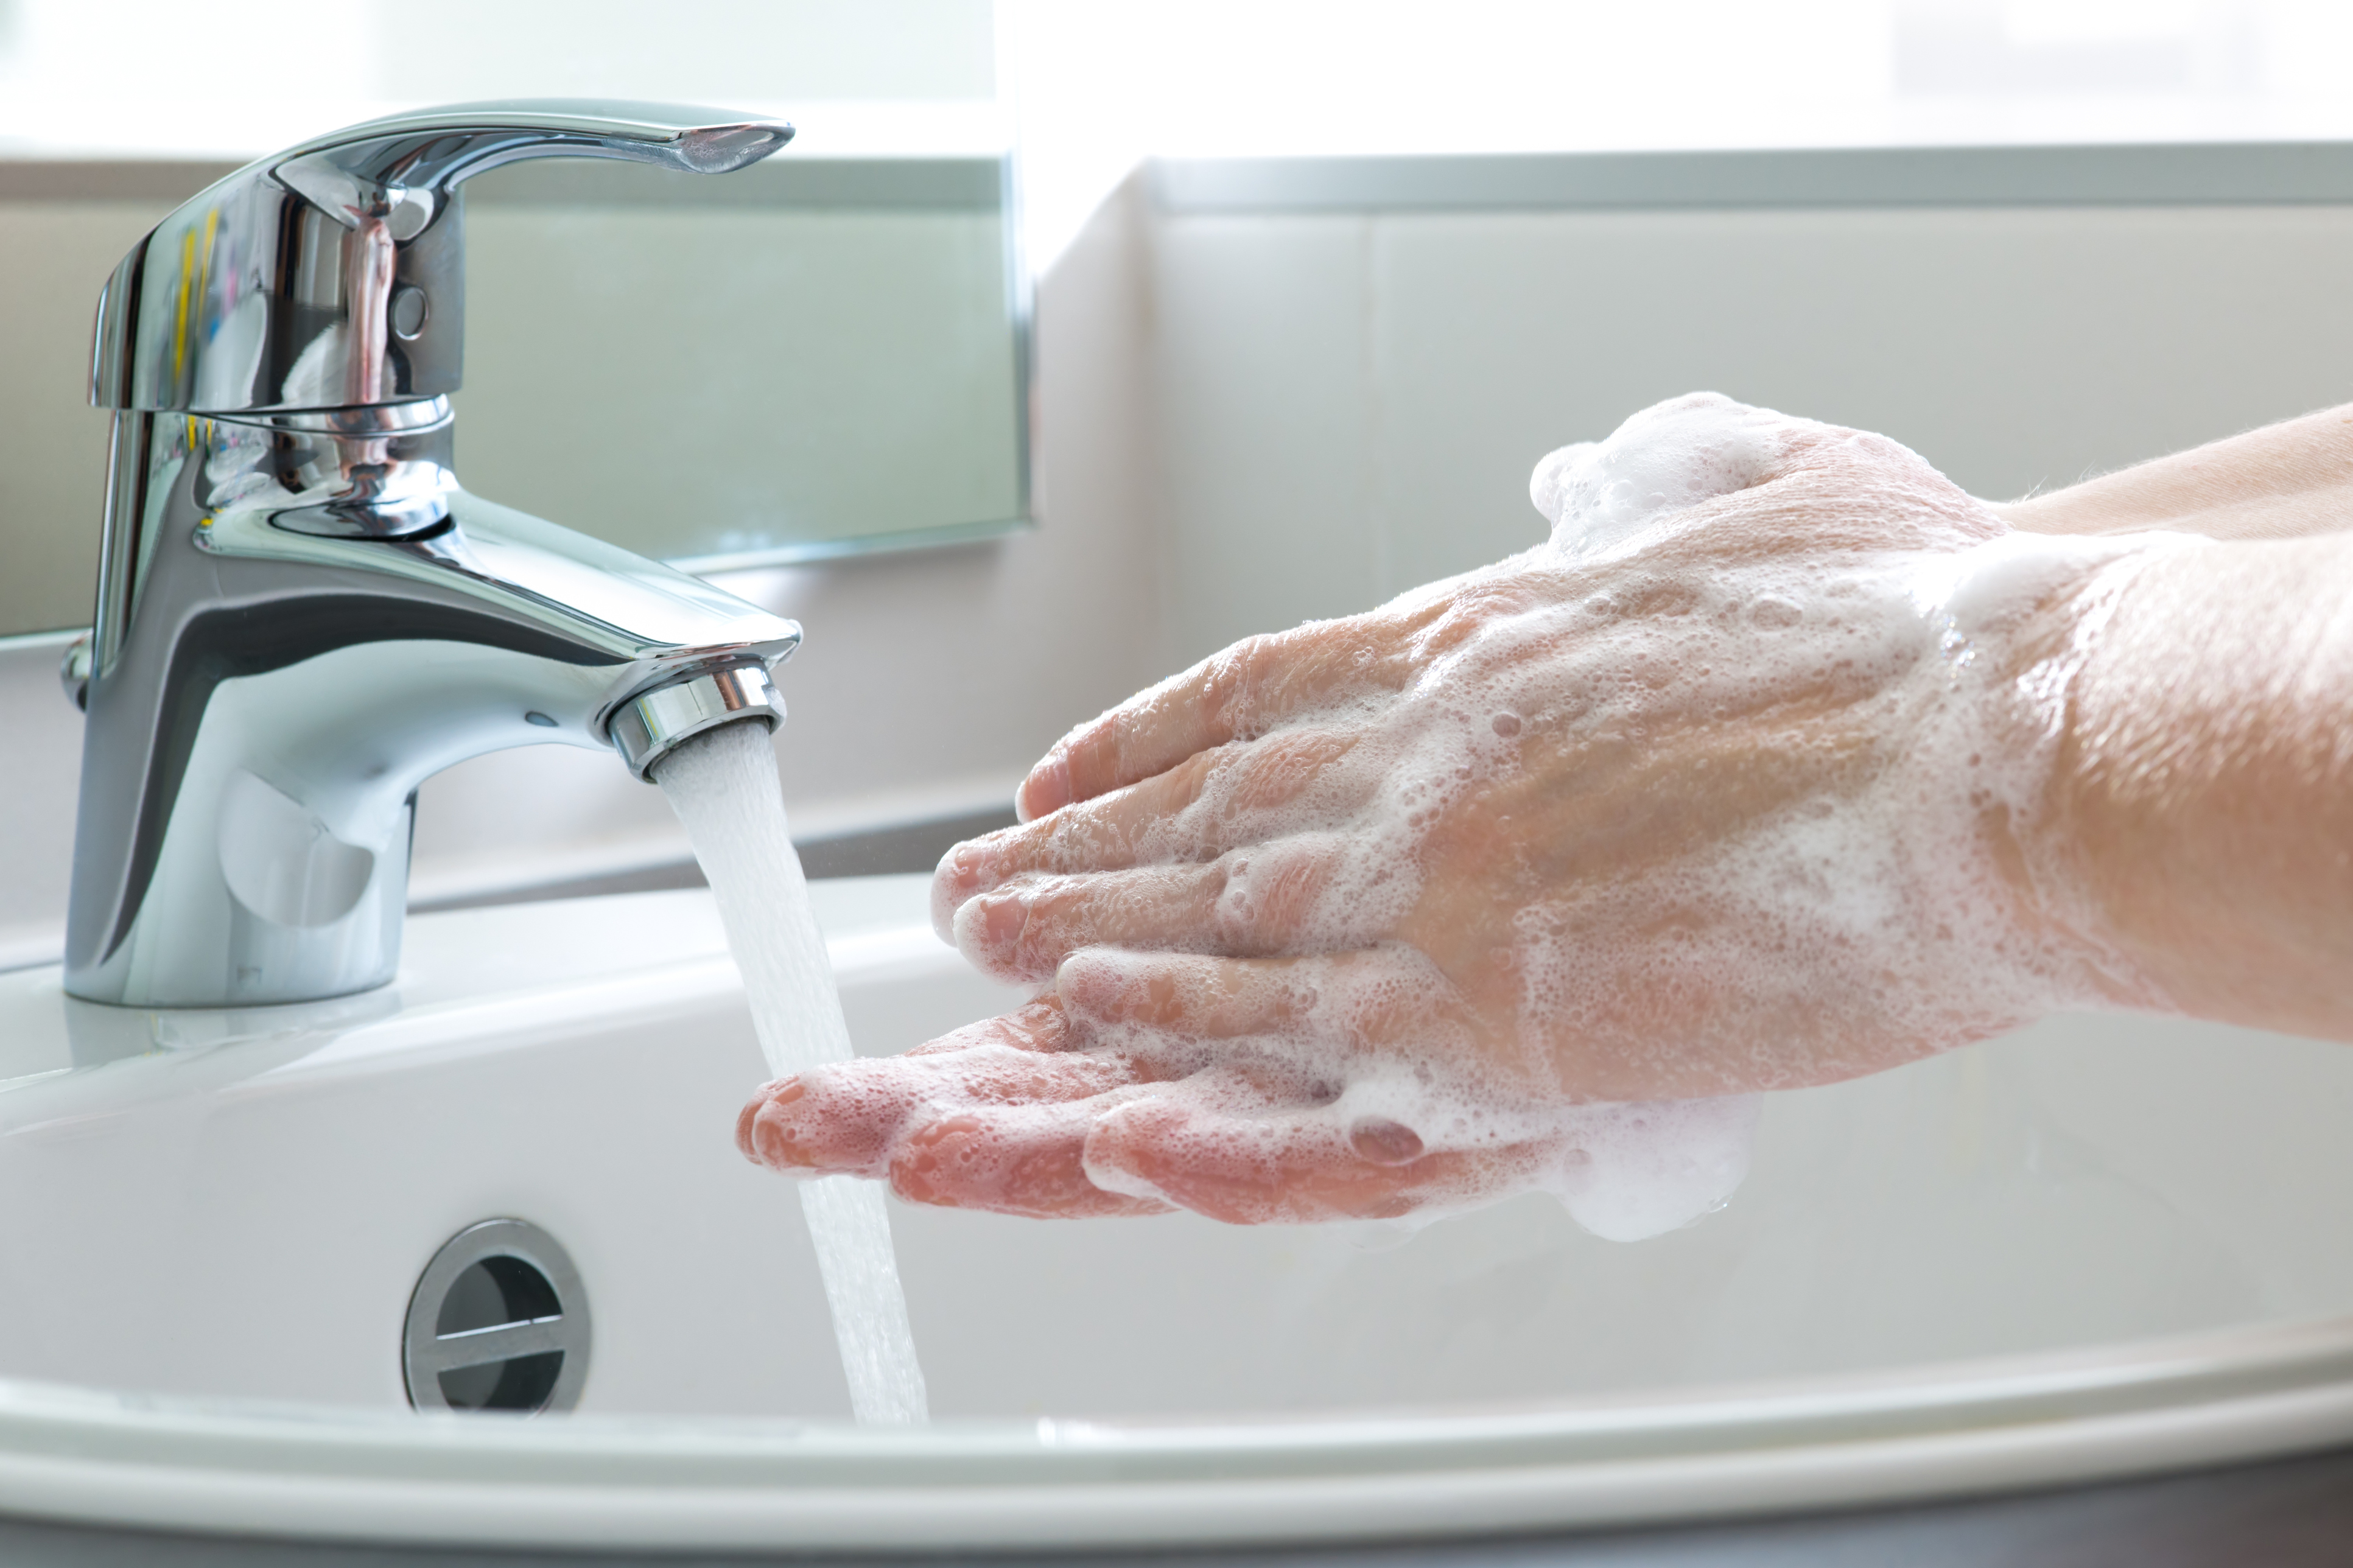 Handwashing After Potty: The Ultimate Hygiene Practice